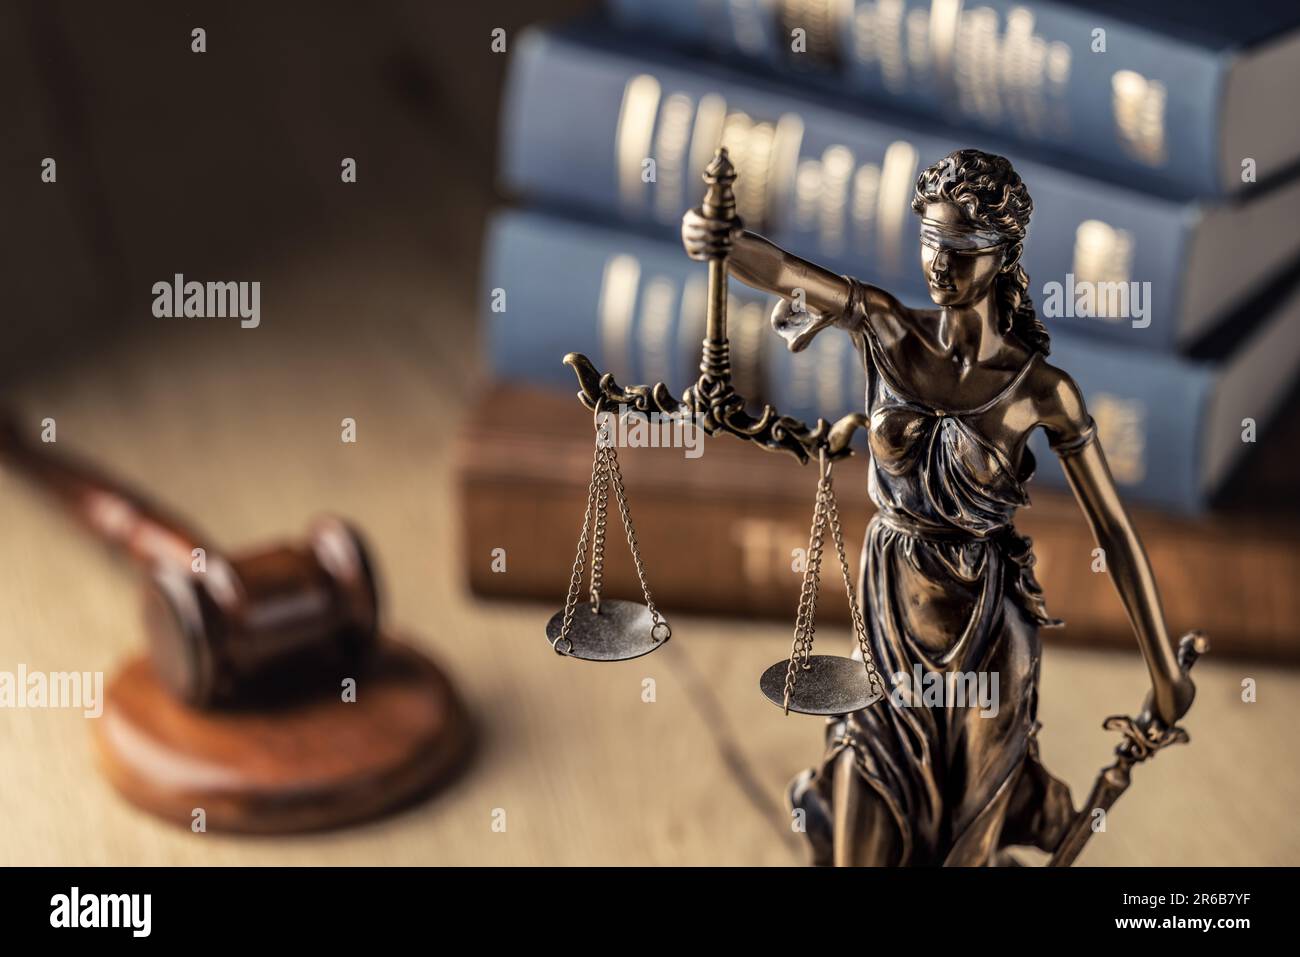 Statute of Justice and law books in the background. Stock Photo